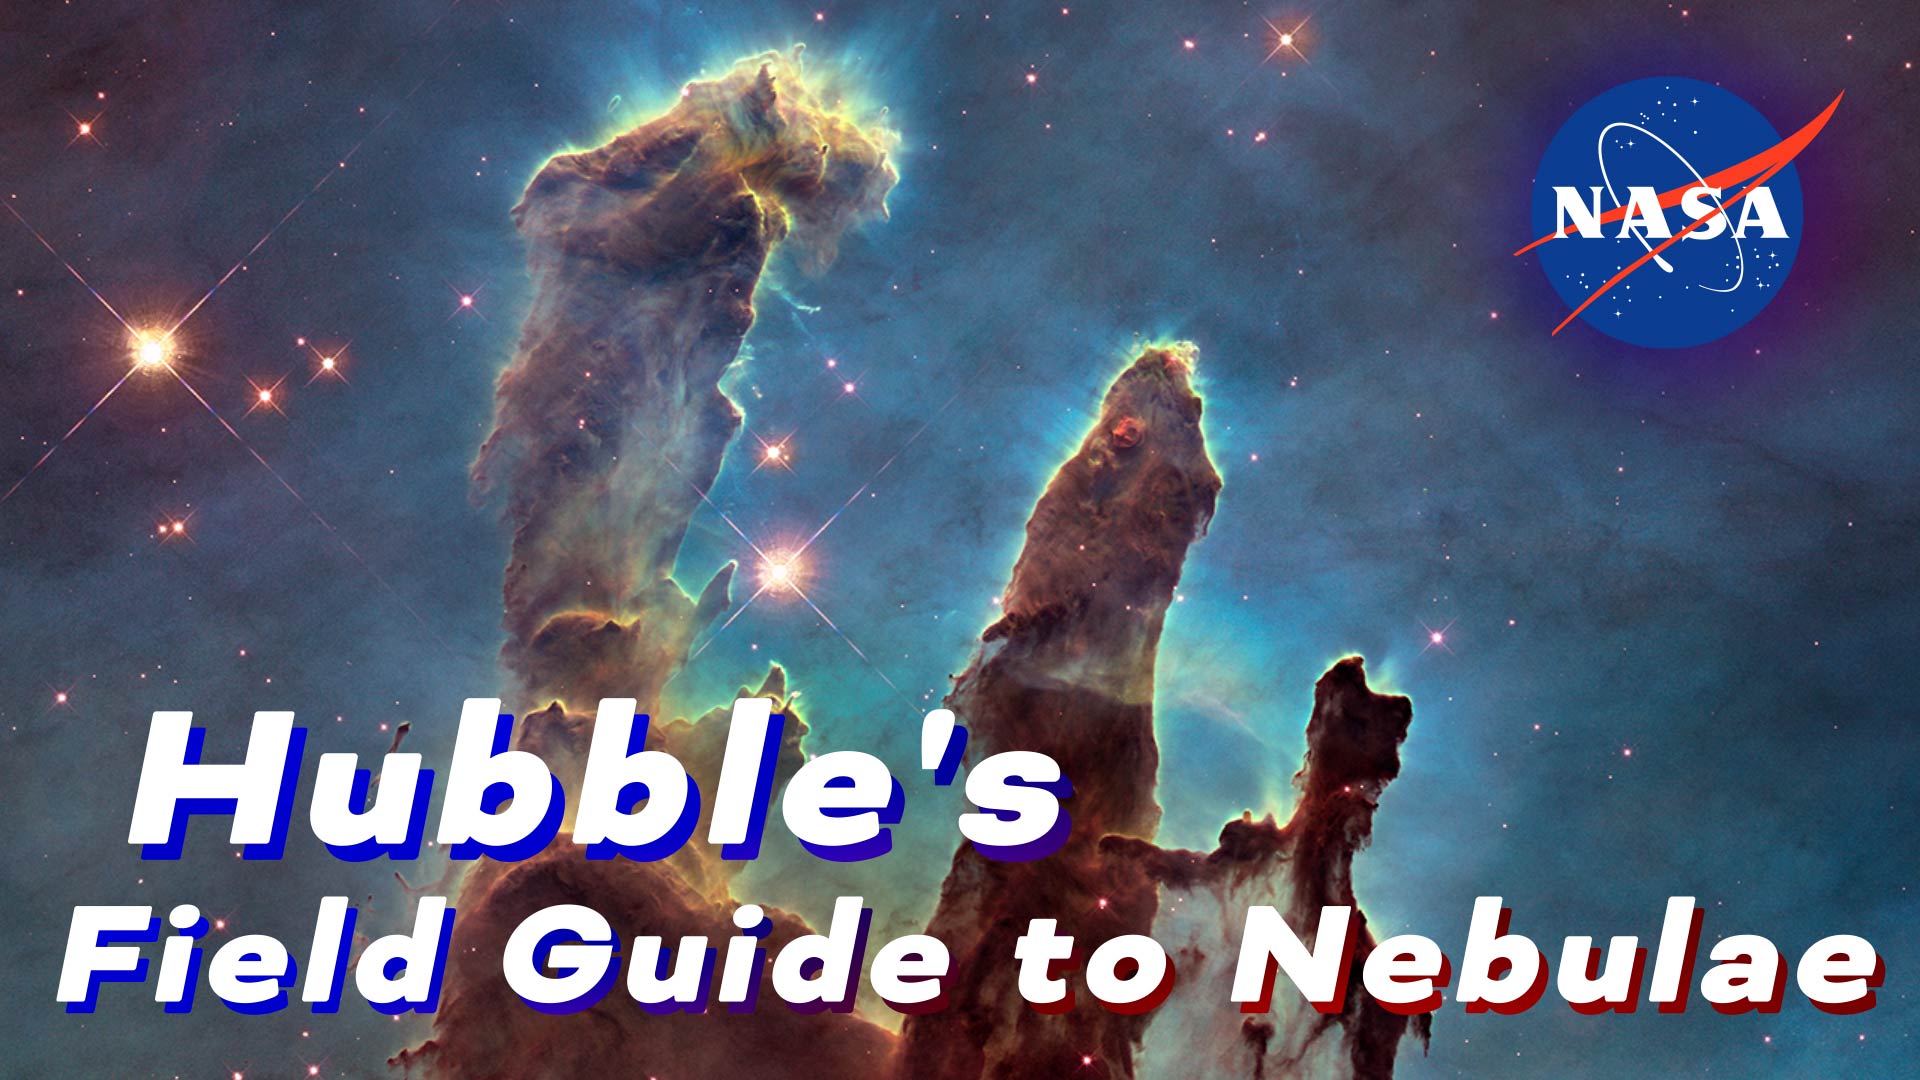 Preview Image for Hubble's Field Guide to Nebulae